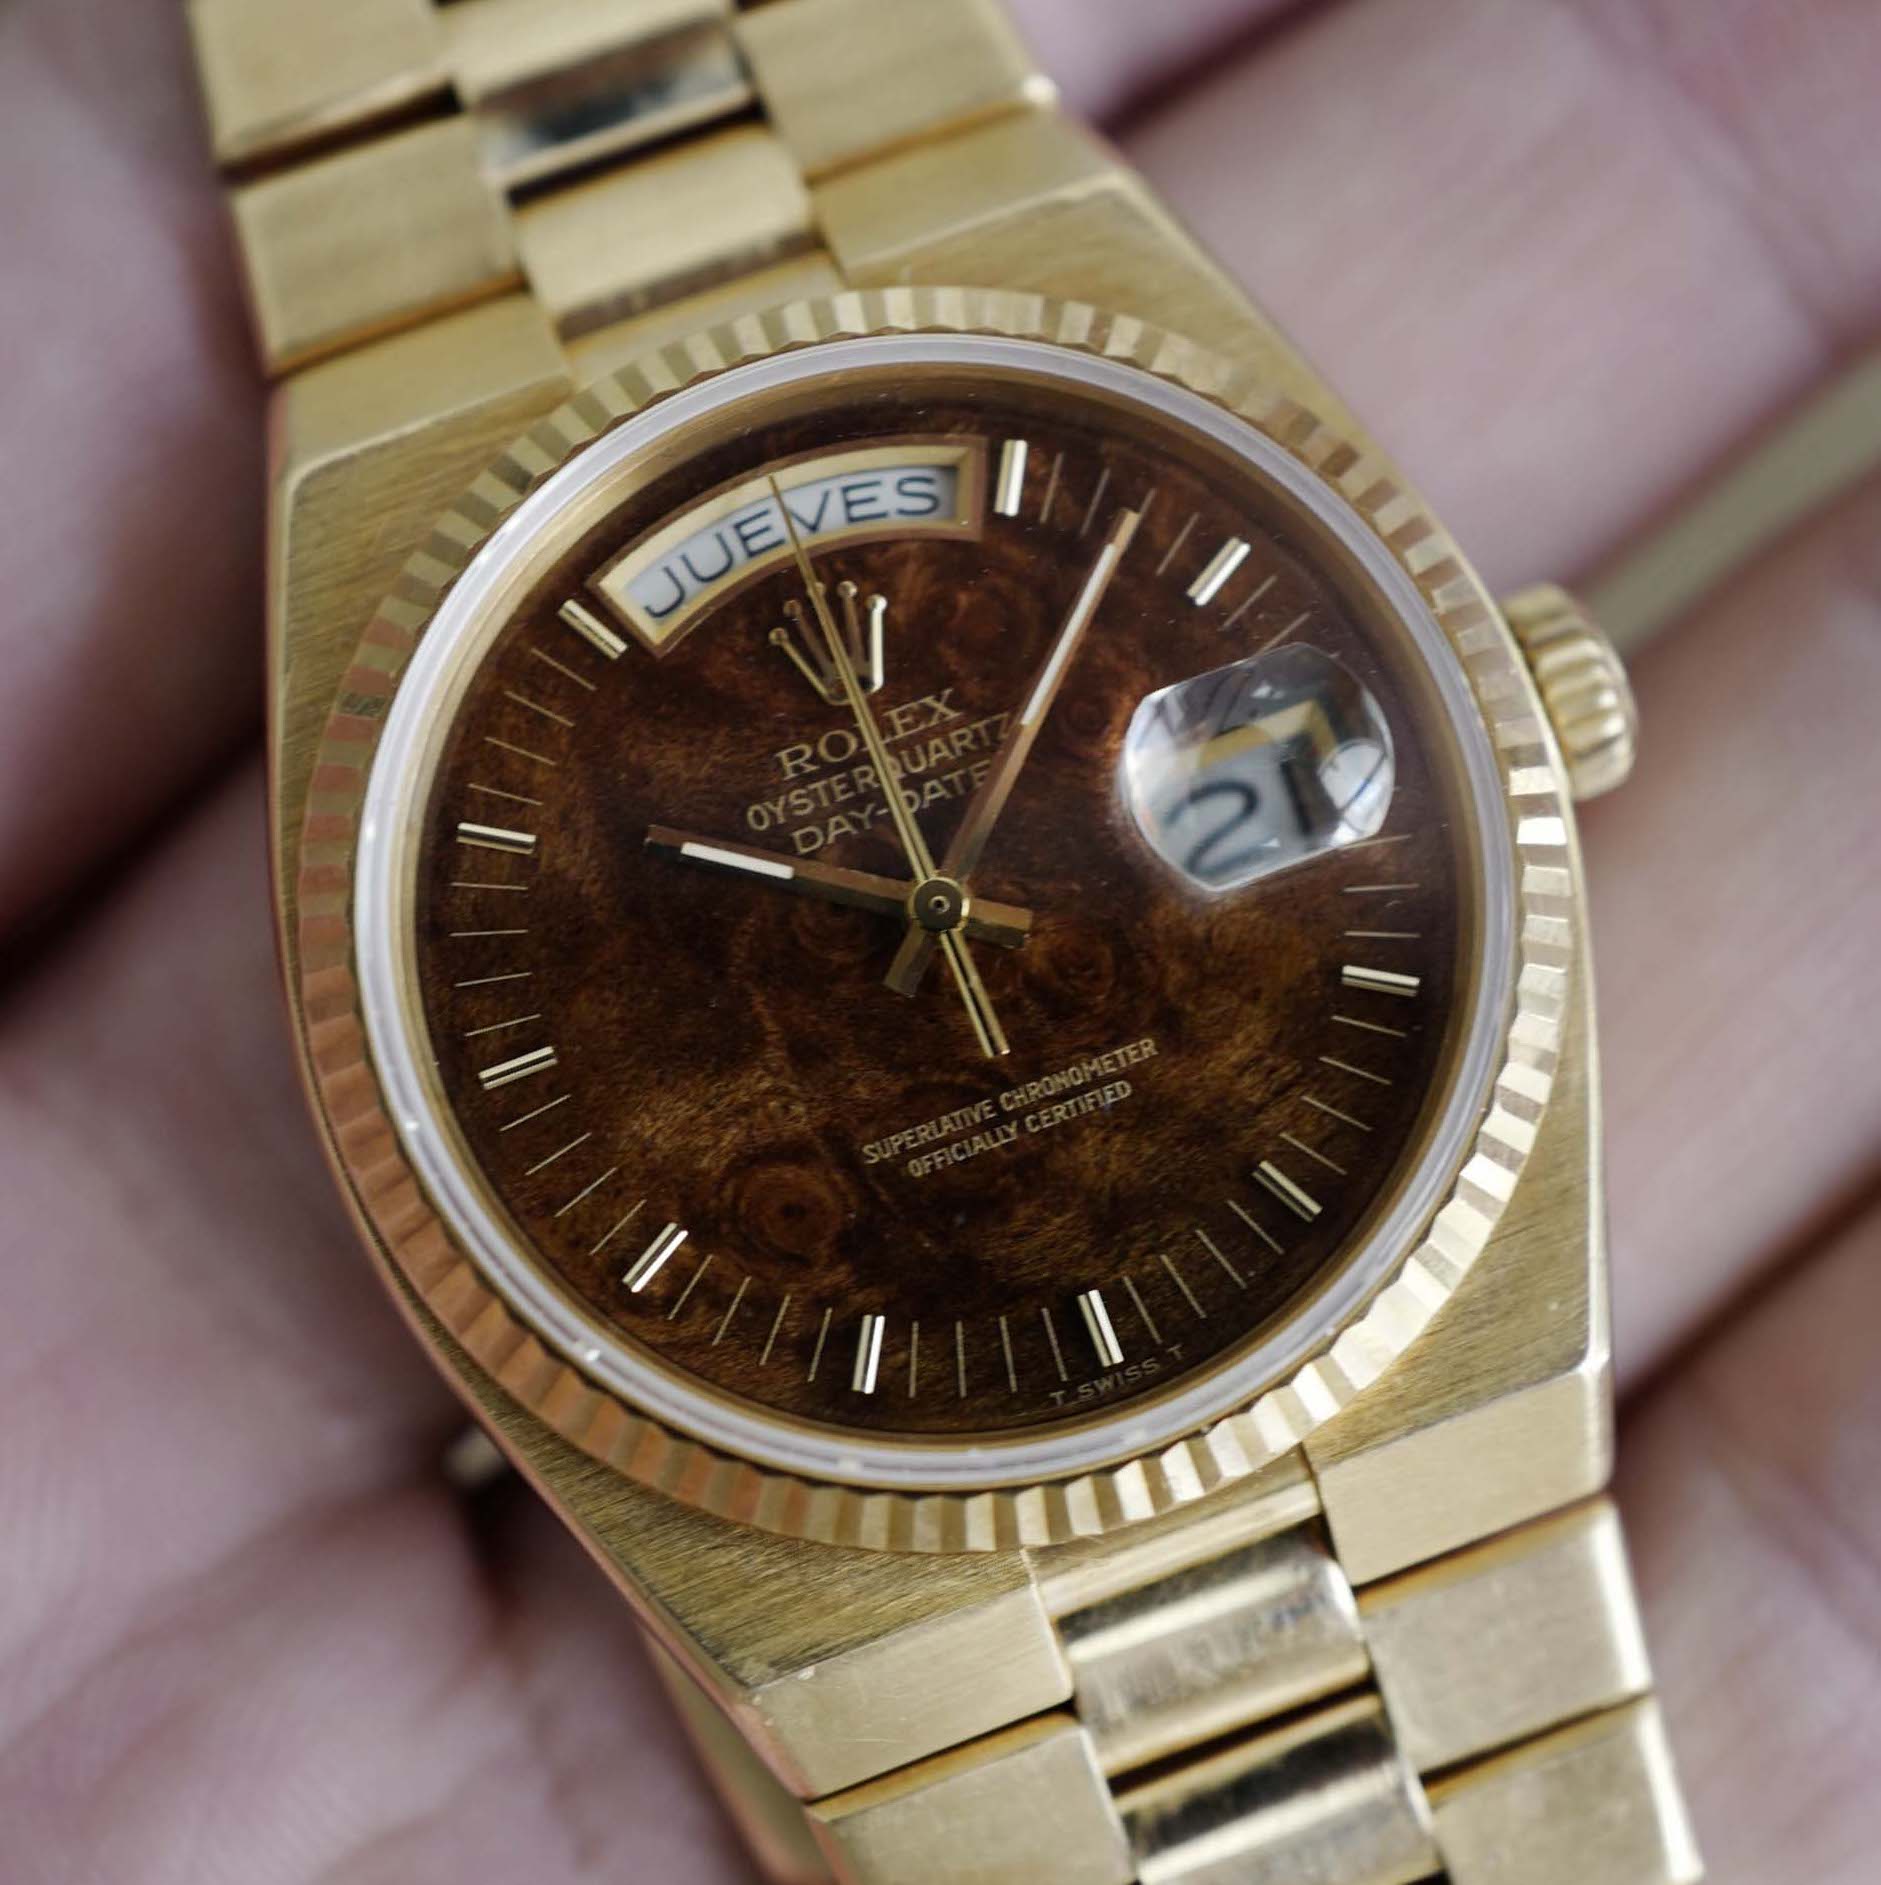 Rolex - Rolex Yellow Gold Day-Date Oysterquartz Ref. 19018 with Wood Dial - The Keystone Watches